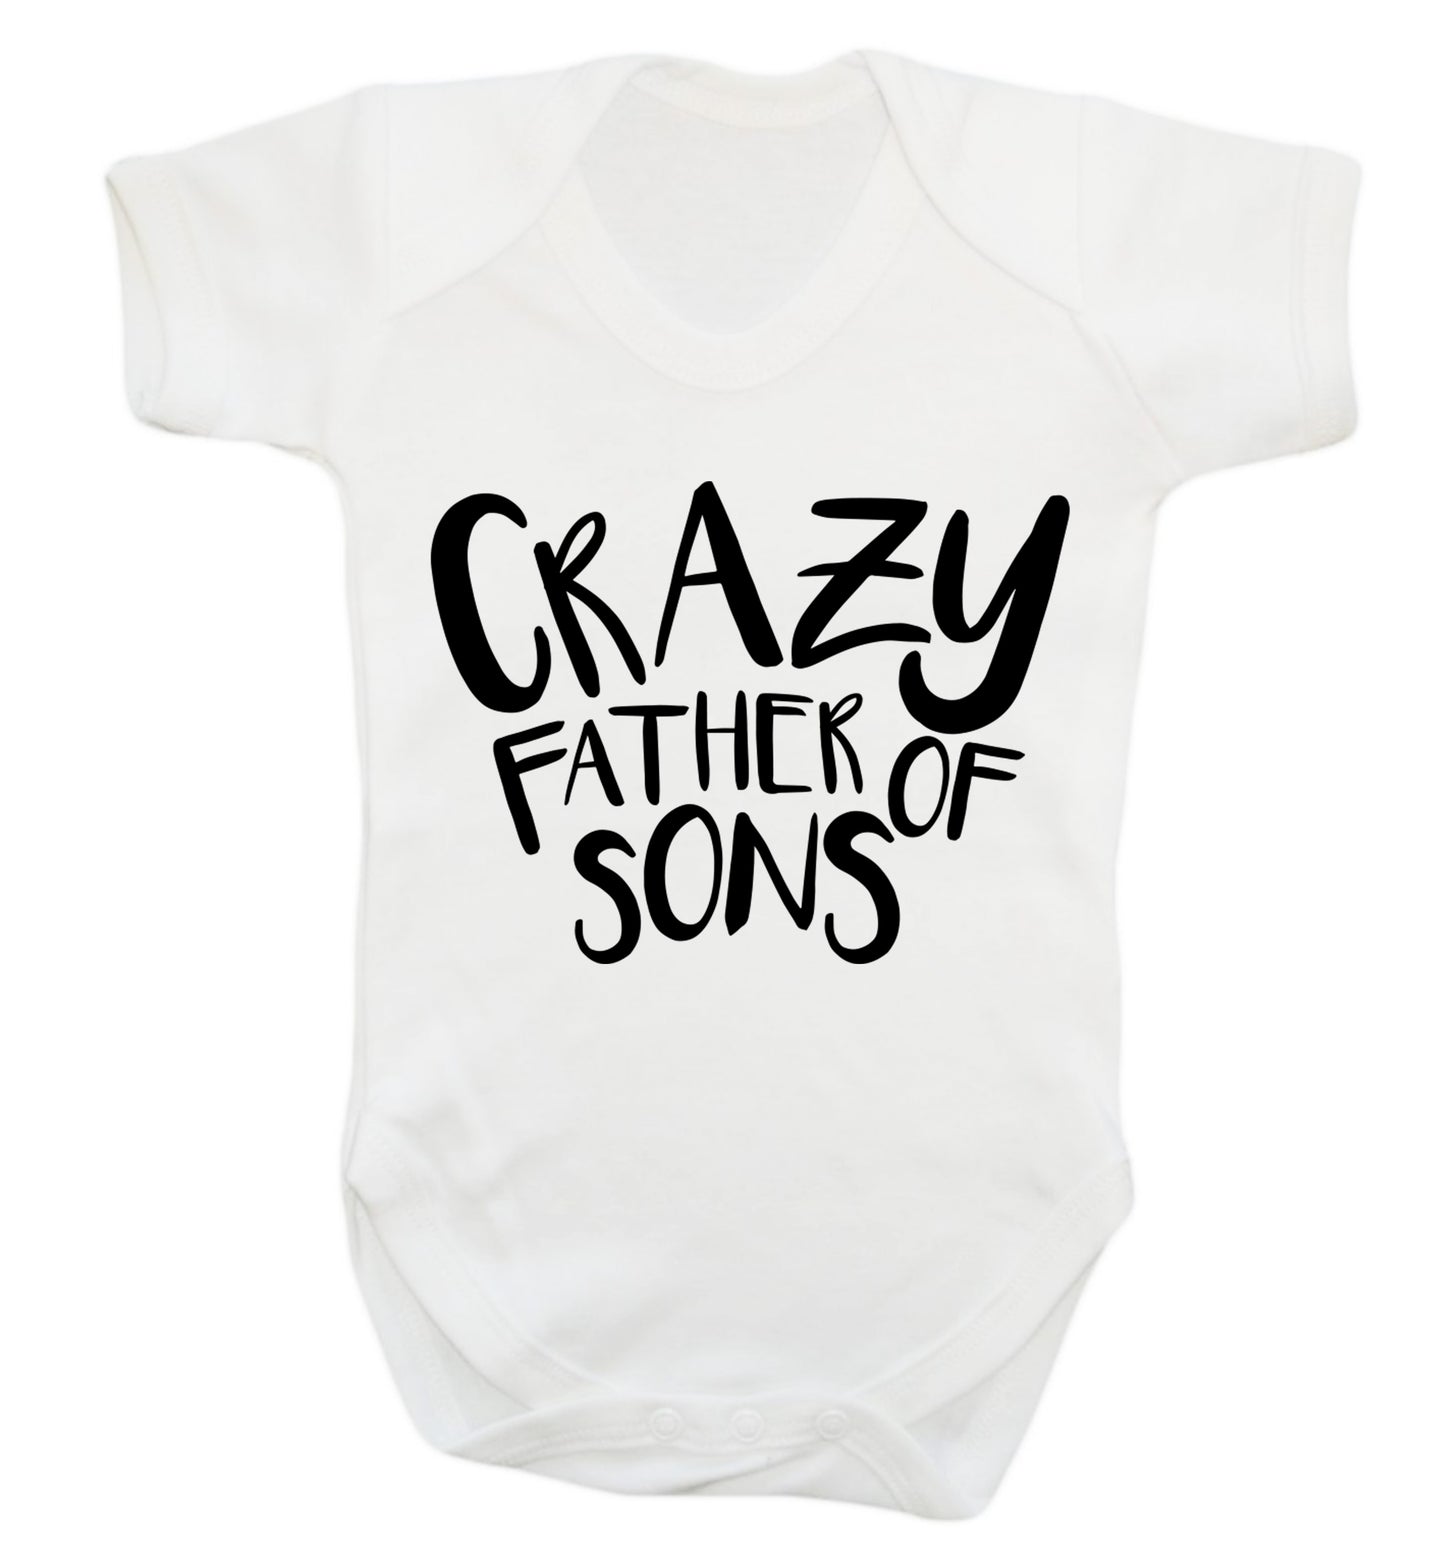 Crazy father of sons Baby Vest white 18-24 months